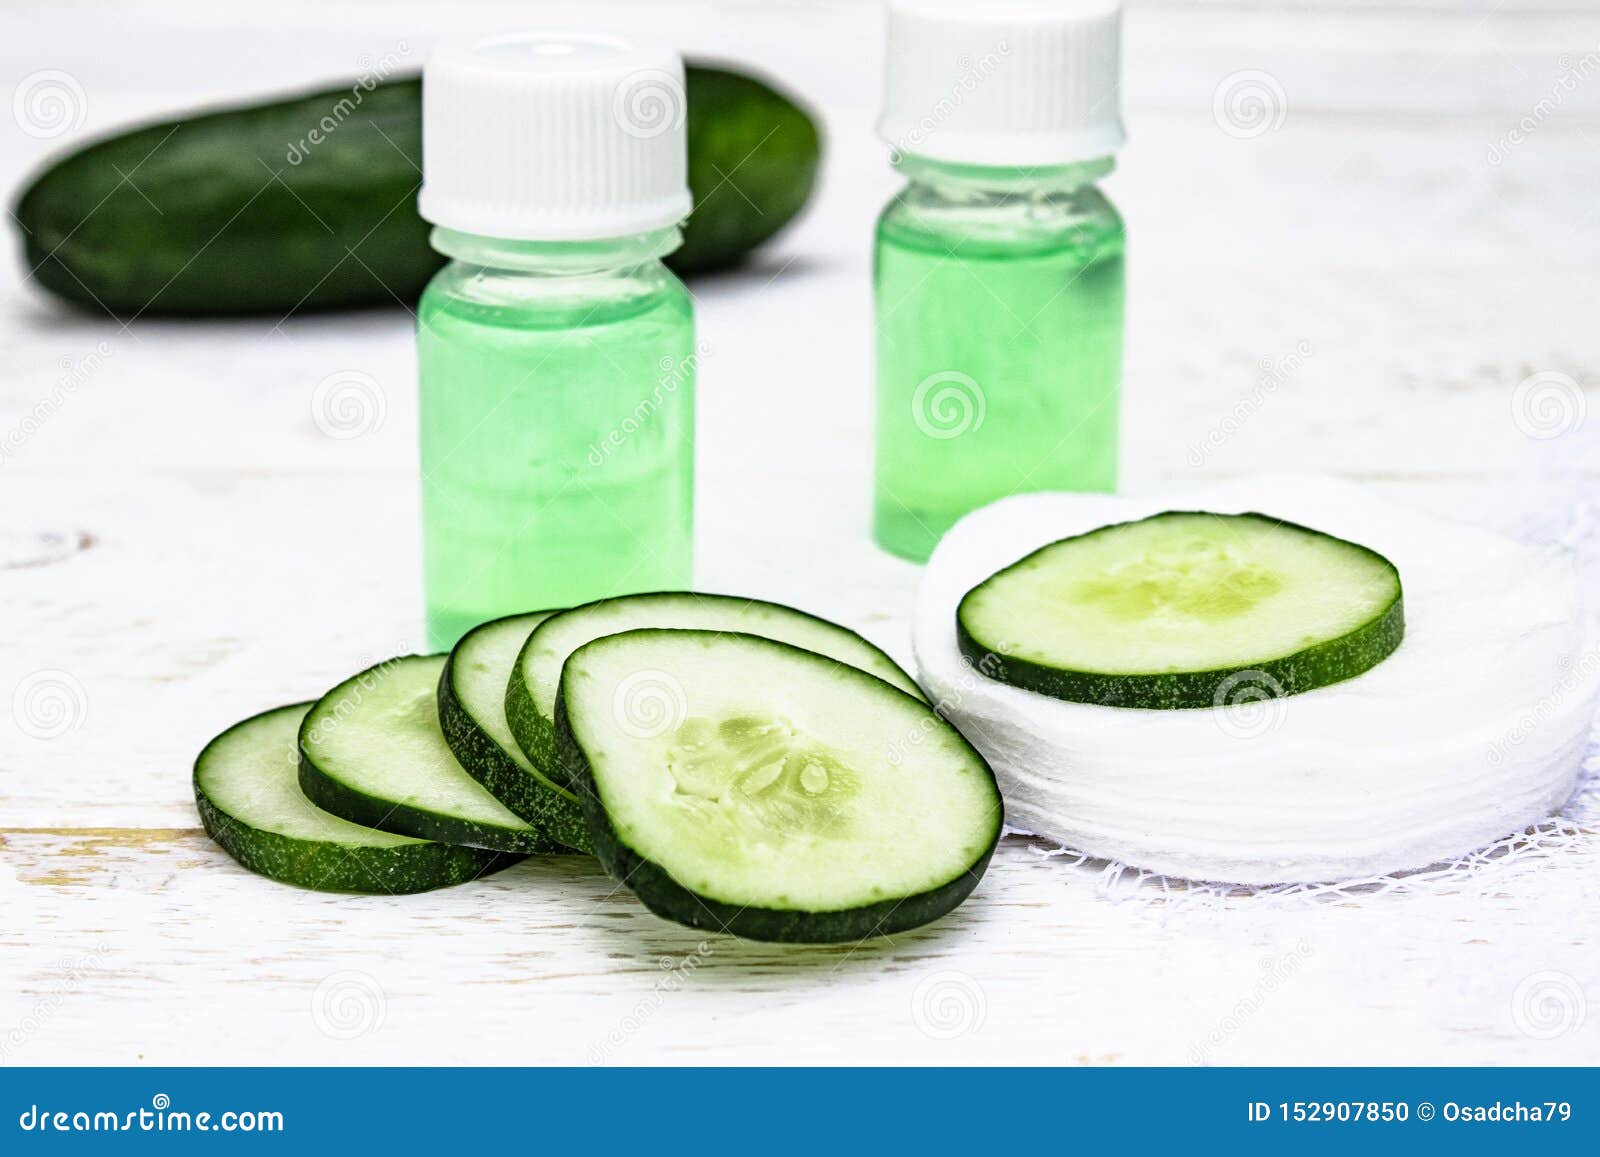 sliced cucumber and a bottle of cucumber extract. liquid cosmetics for skin care